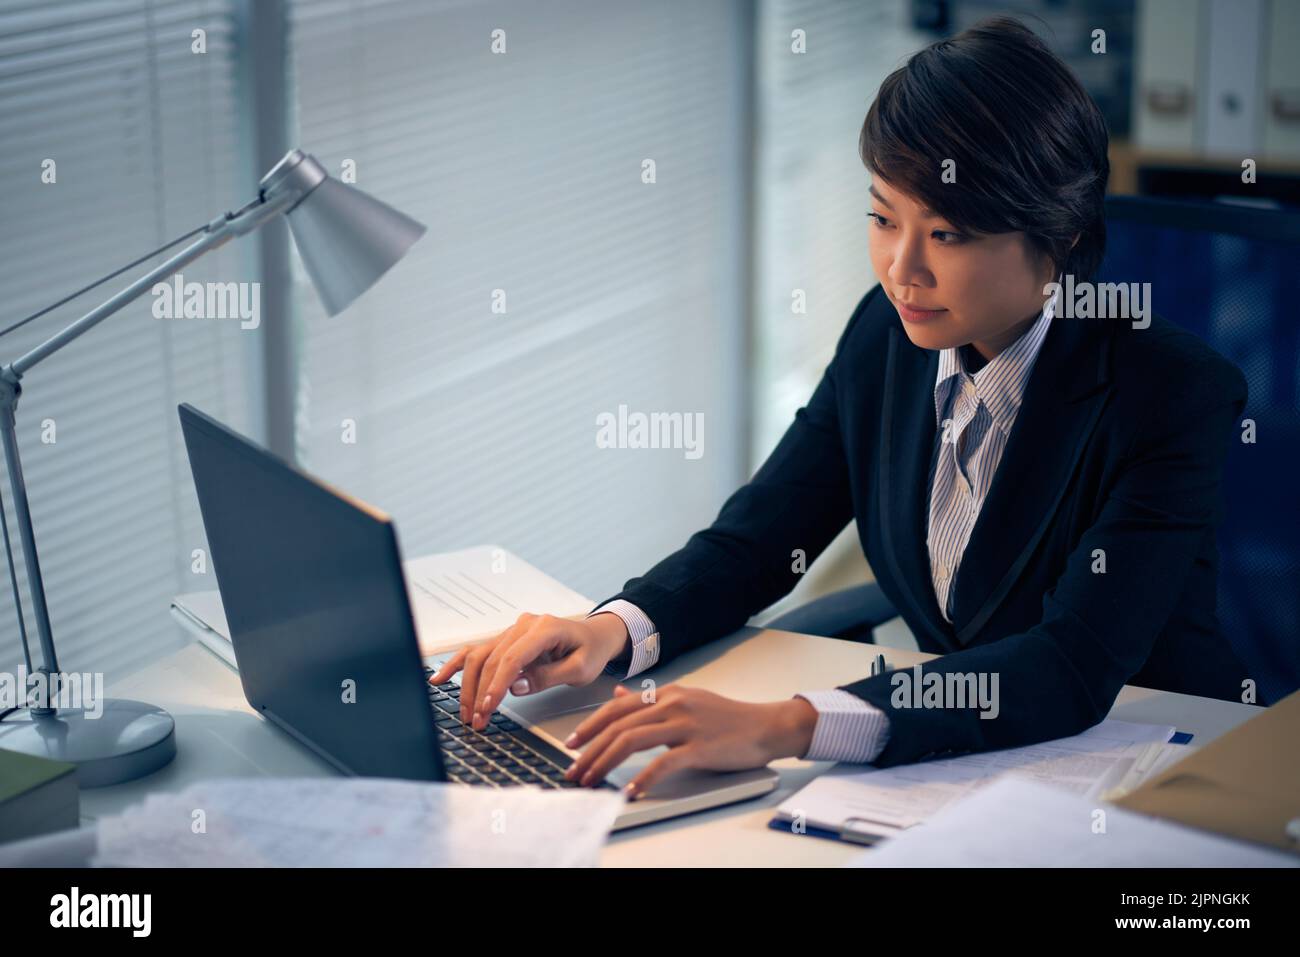 Female intern lawyer working on laptop in office Stock Photo